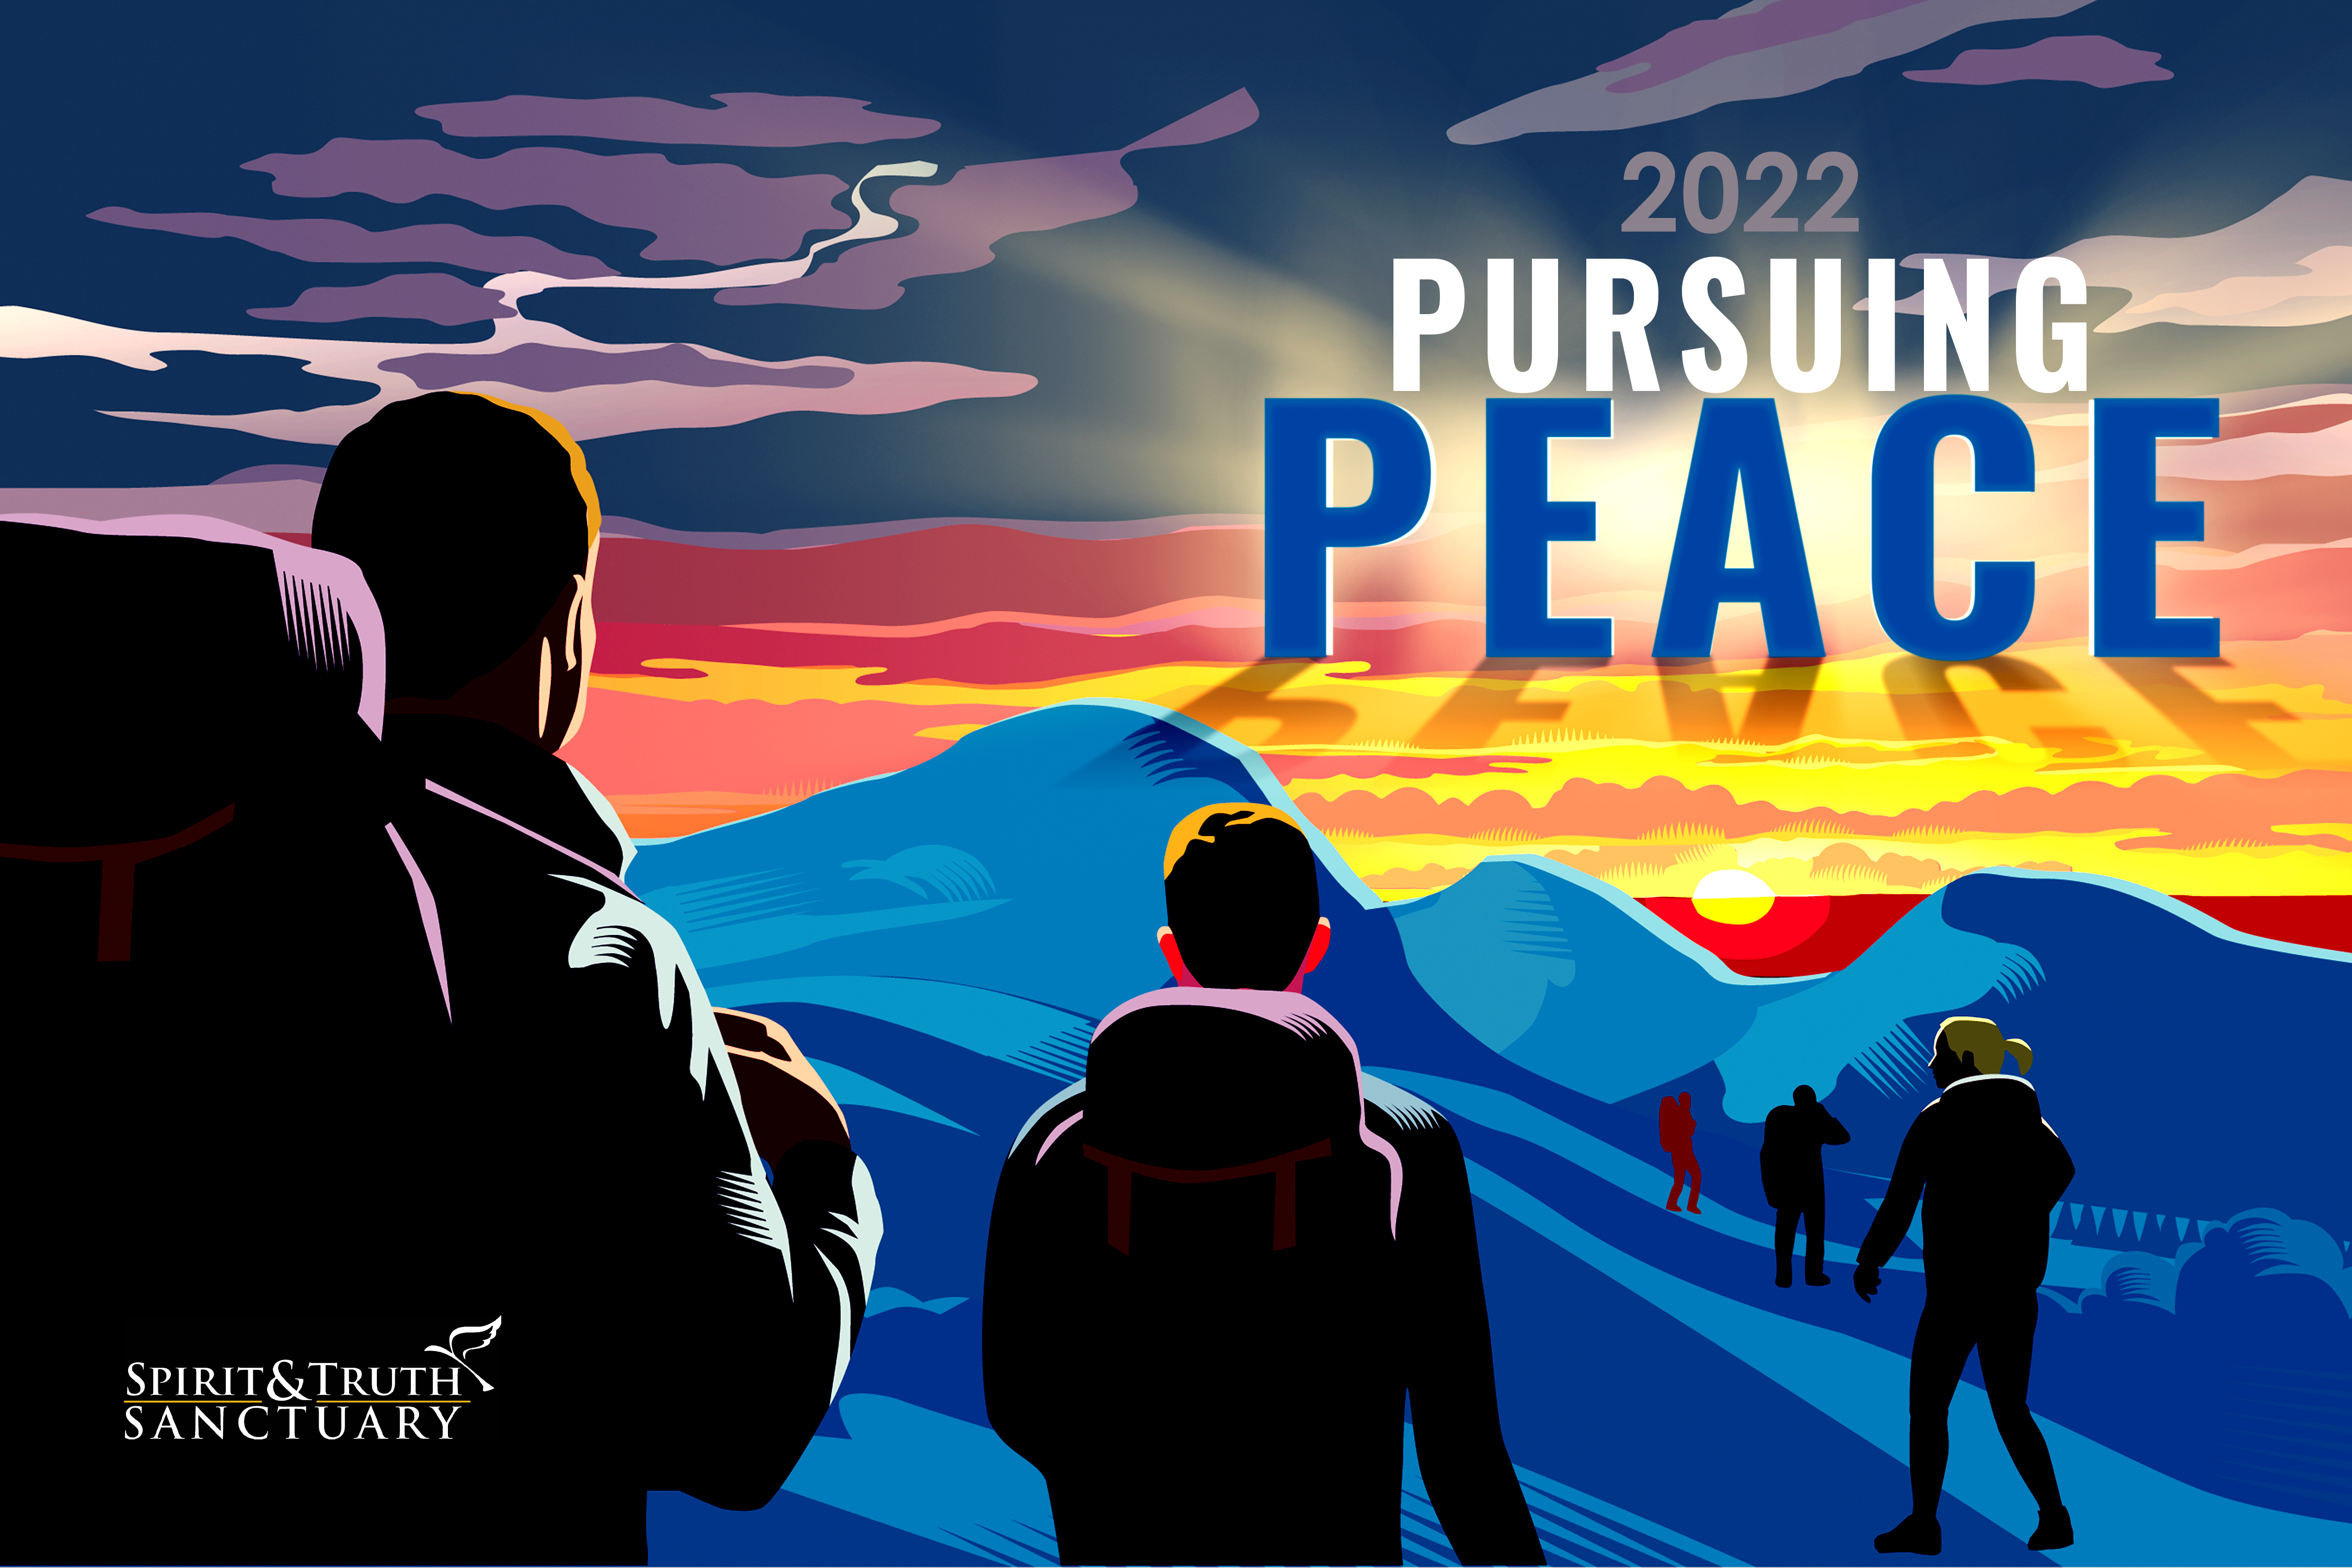 PURSUING PEACE in 2022!